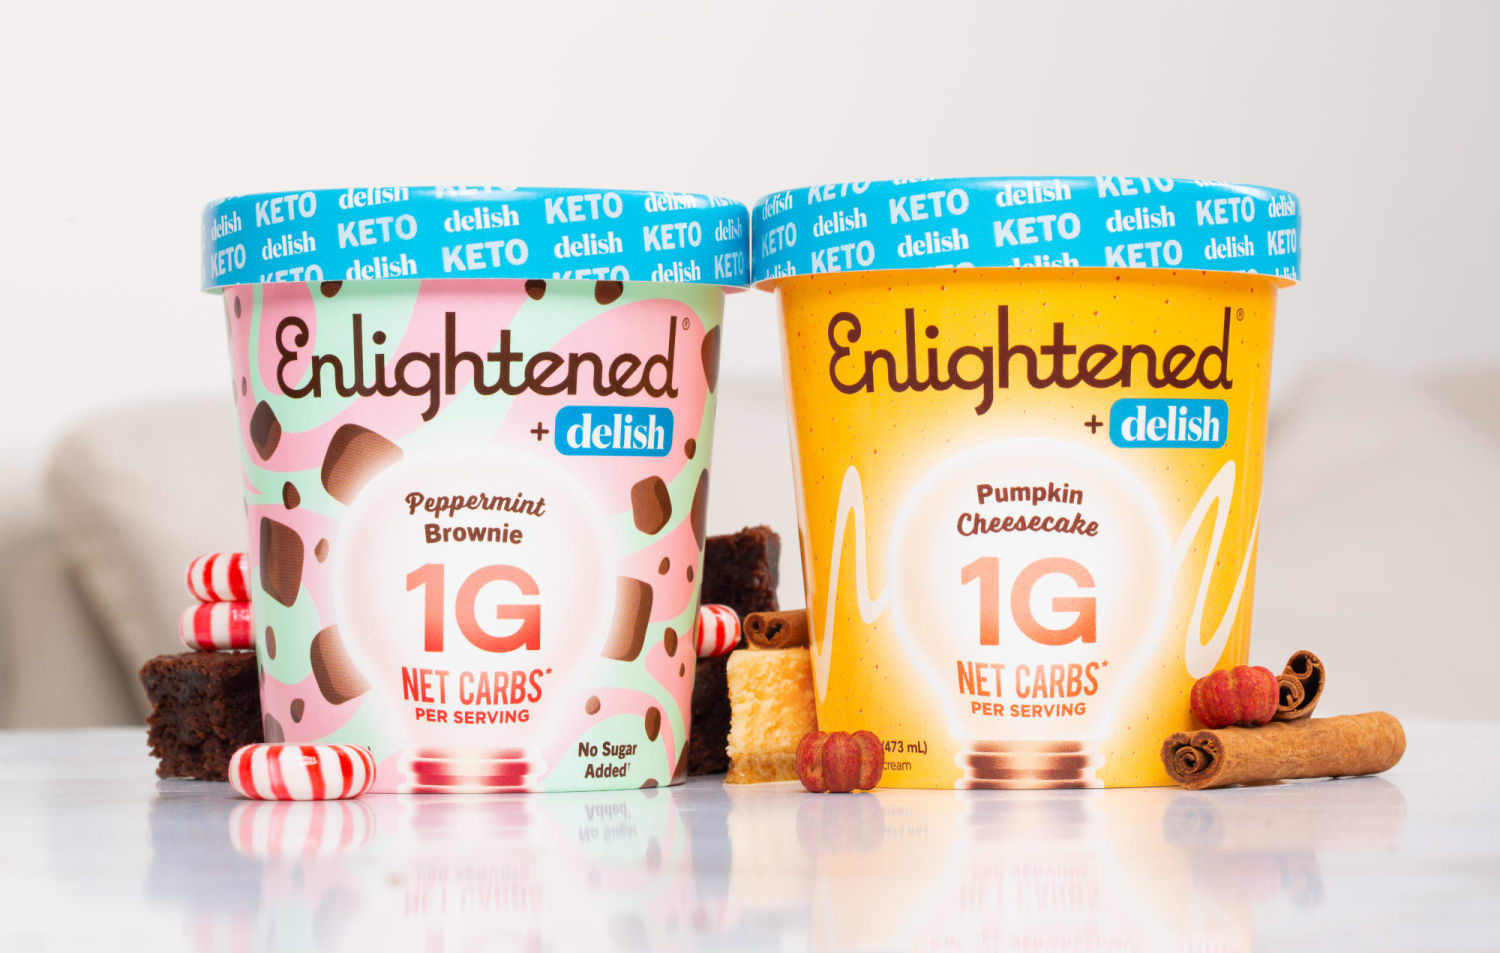 Enlightened and Delish Fall Collection innovates nostalgic flavors